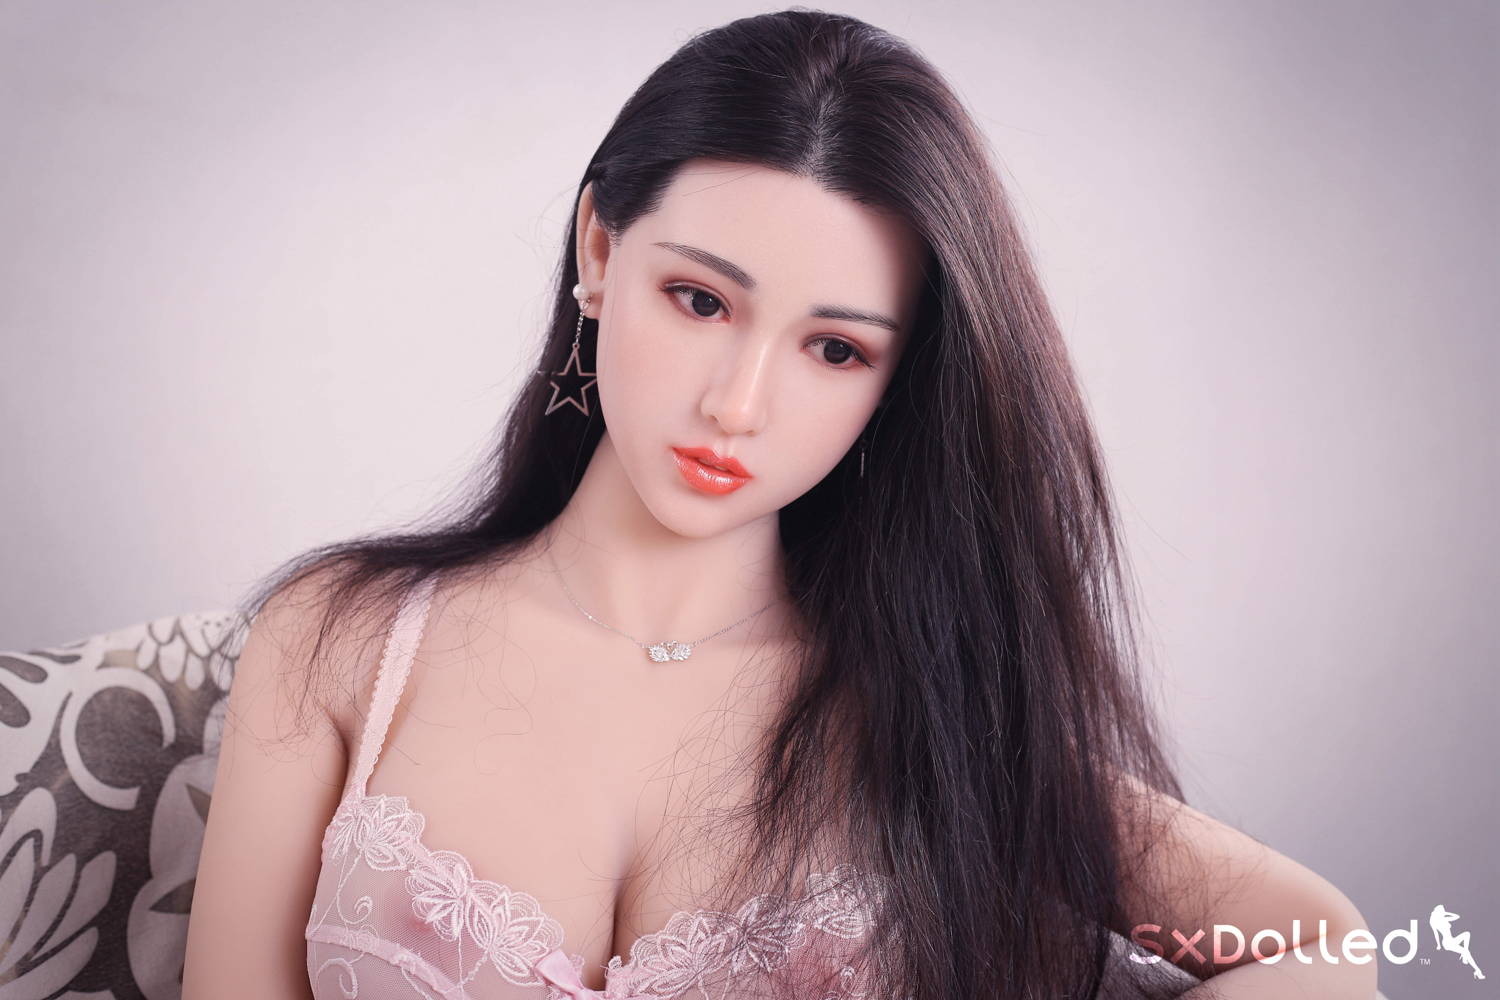 Ways A Sex Doll Can Help You Deal With Anxiety | SxDolled